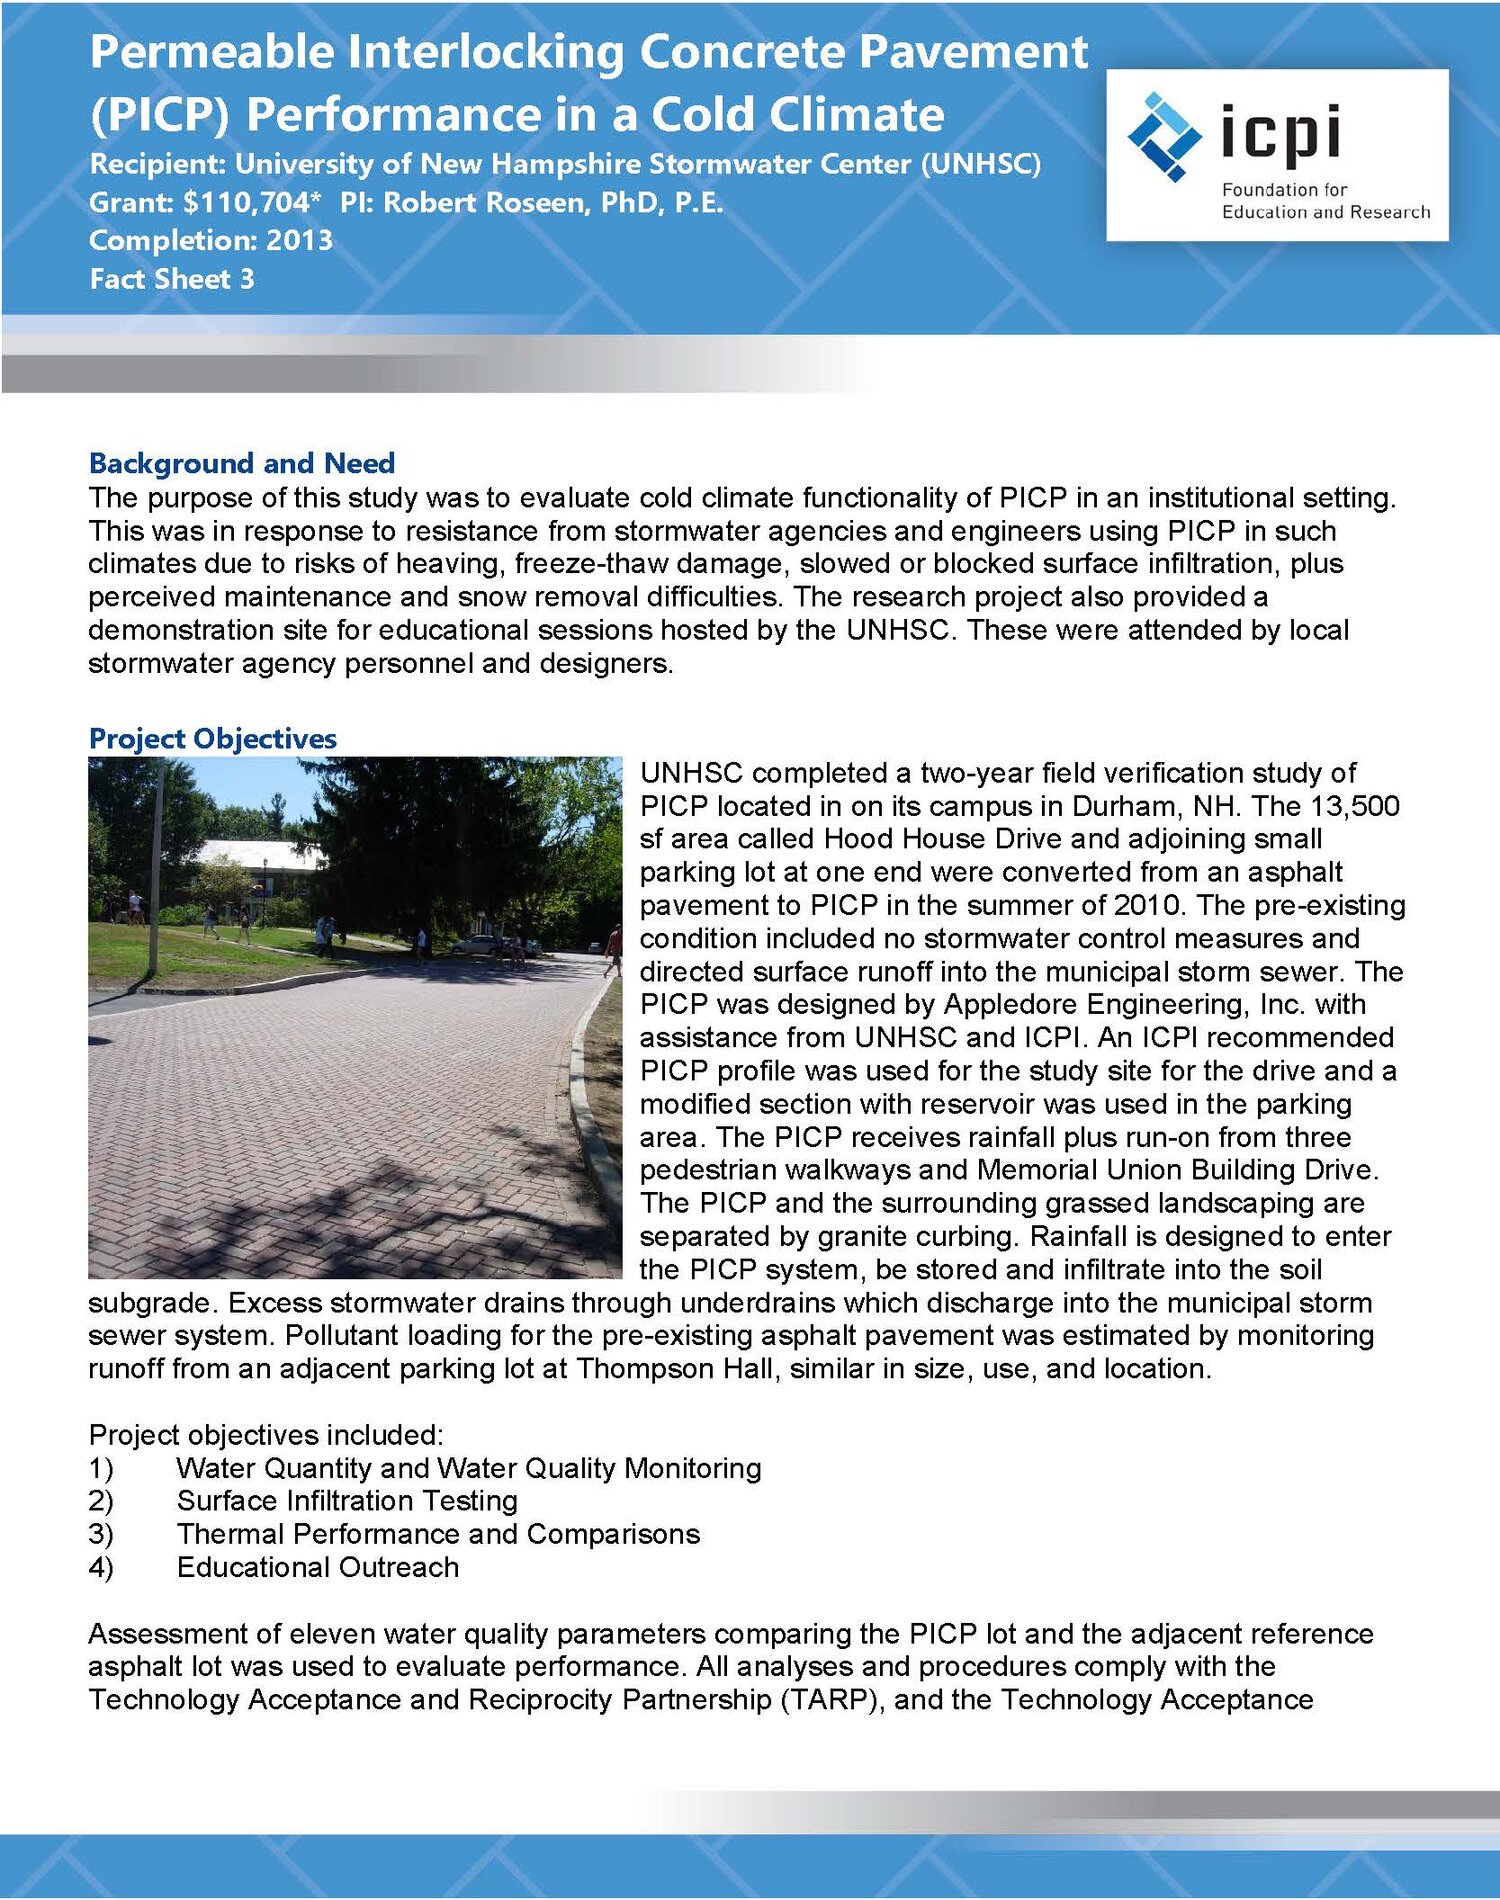 Permeable Interlocking Concrete Pavement (PICP) Performance in Cold Climate